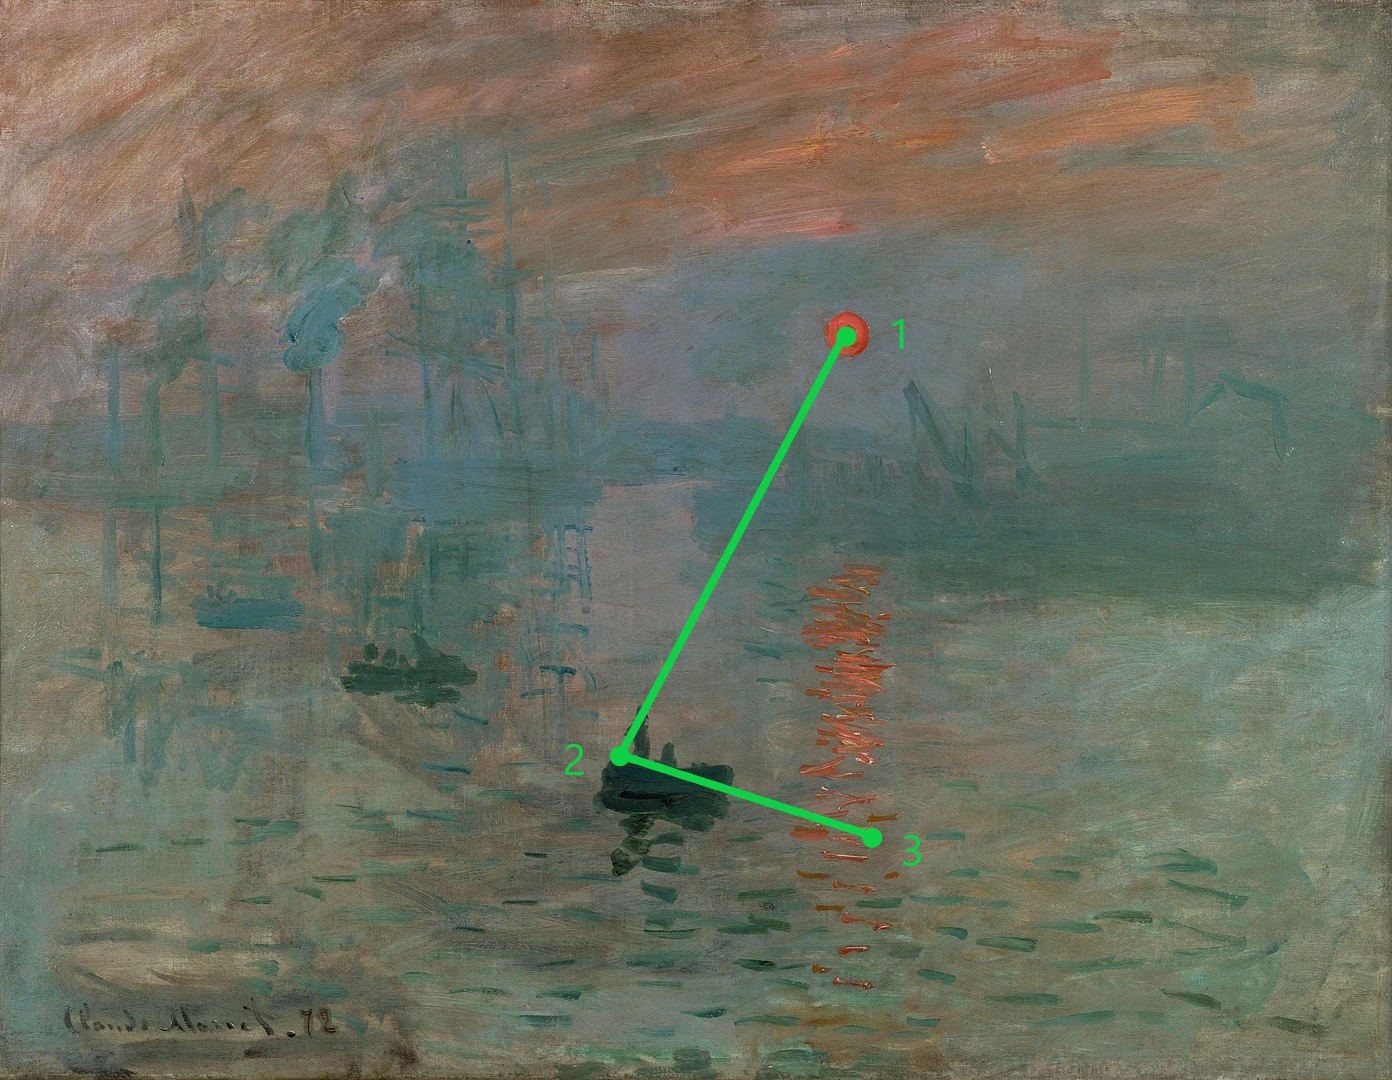 Image of Impression, Sunrise with three points overlaid, with lines drawing out a L